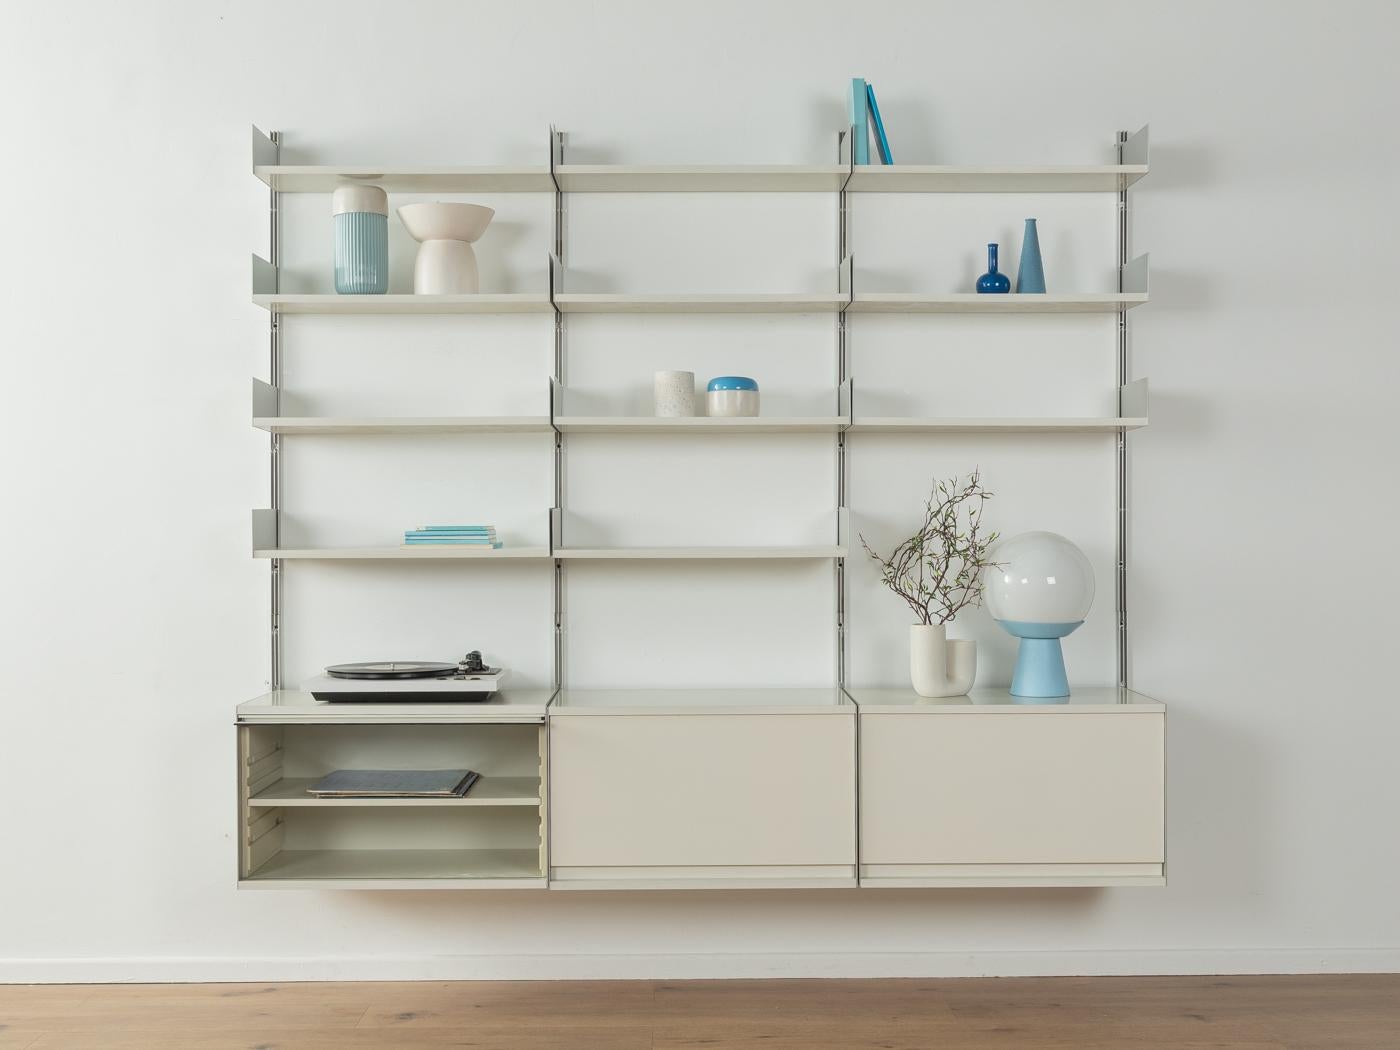 Article Details
Modular 606 shelving system by Dieter Rams for Vitsœ from the 1960s. High-quality construction consisting of eight aluminum E-Tracks, eleven shelves and three containers with up and over door.

Quality Features:
-accomplished design: